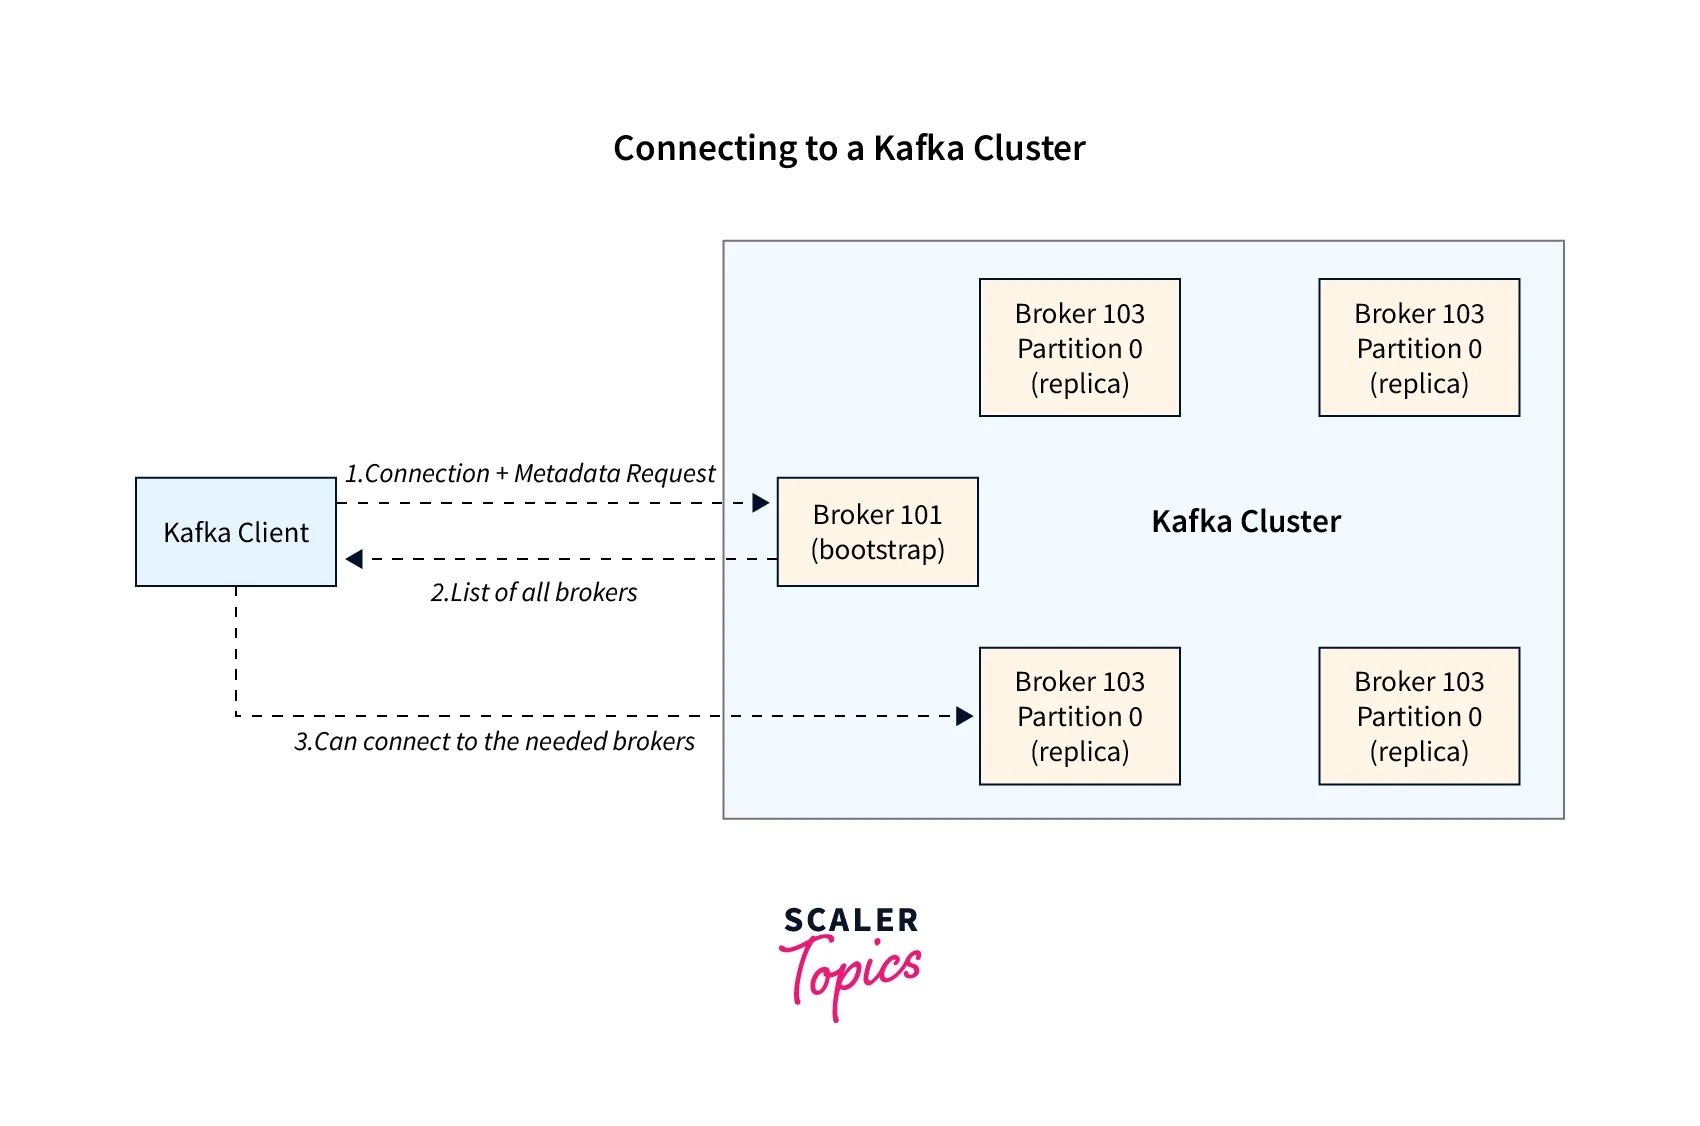 connects with a Kafka Cluster